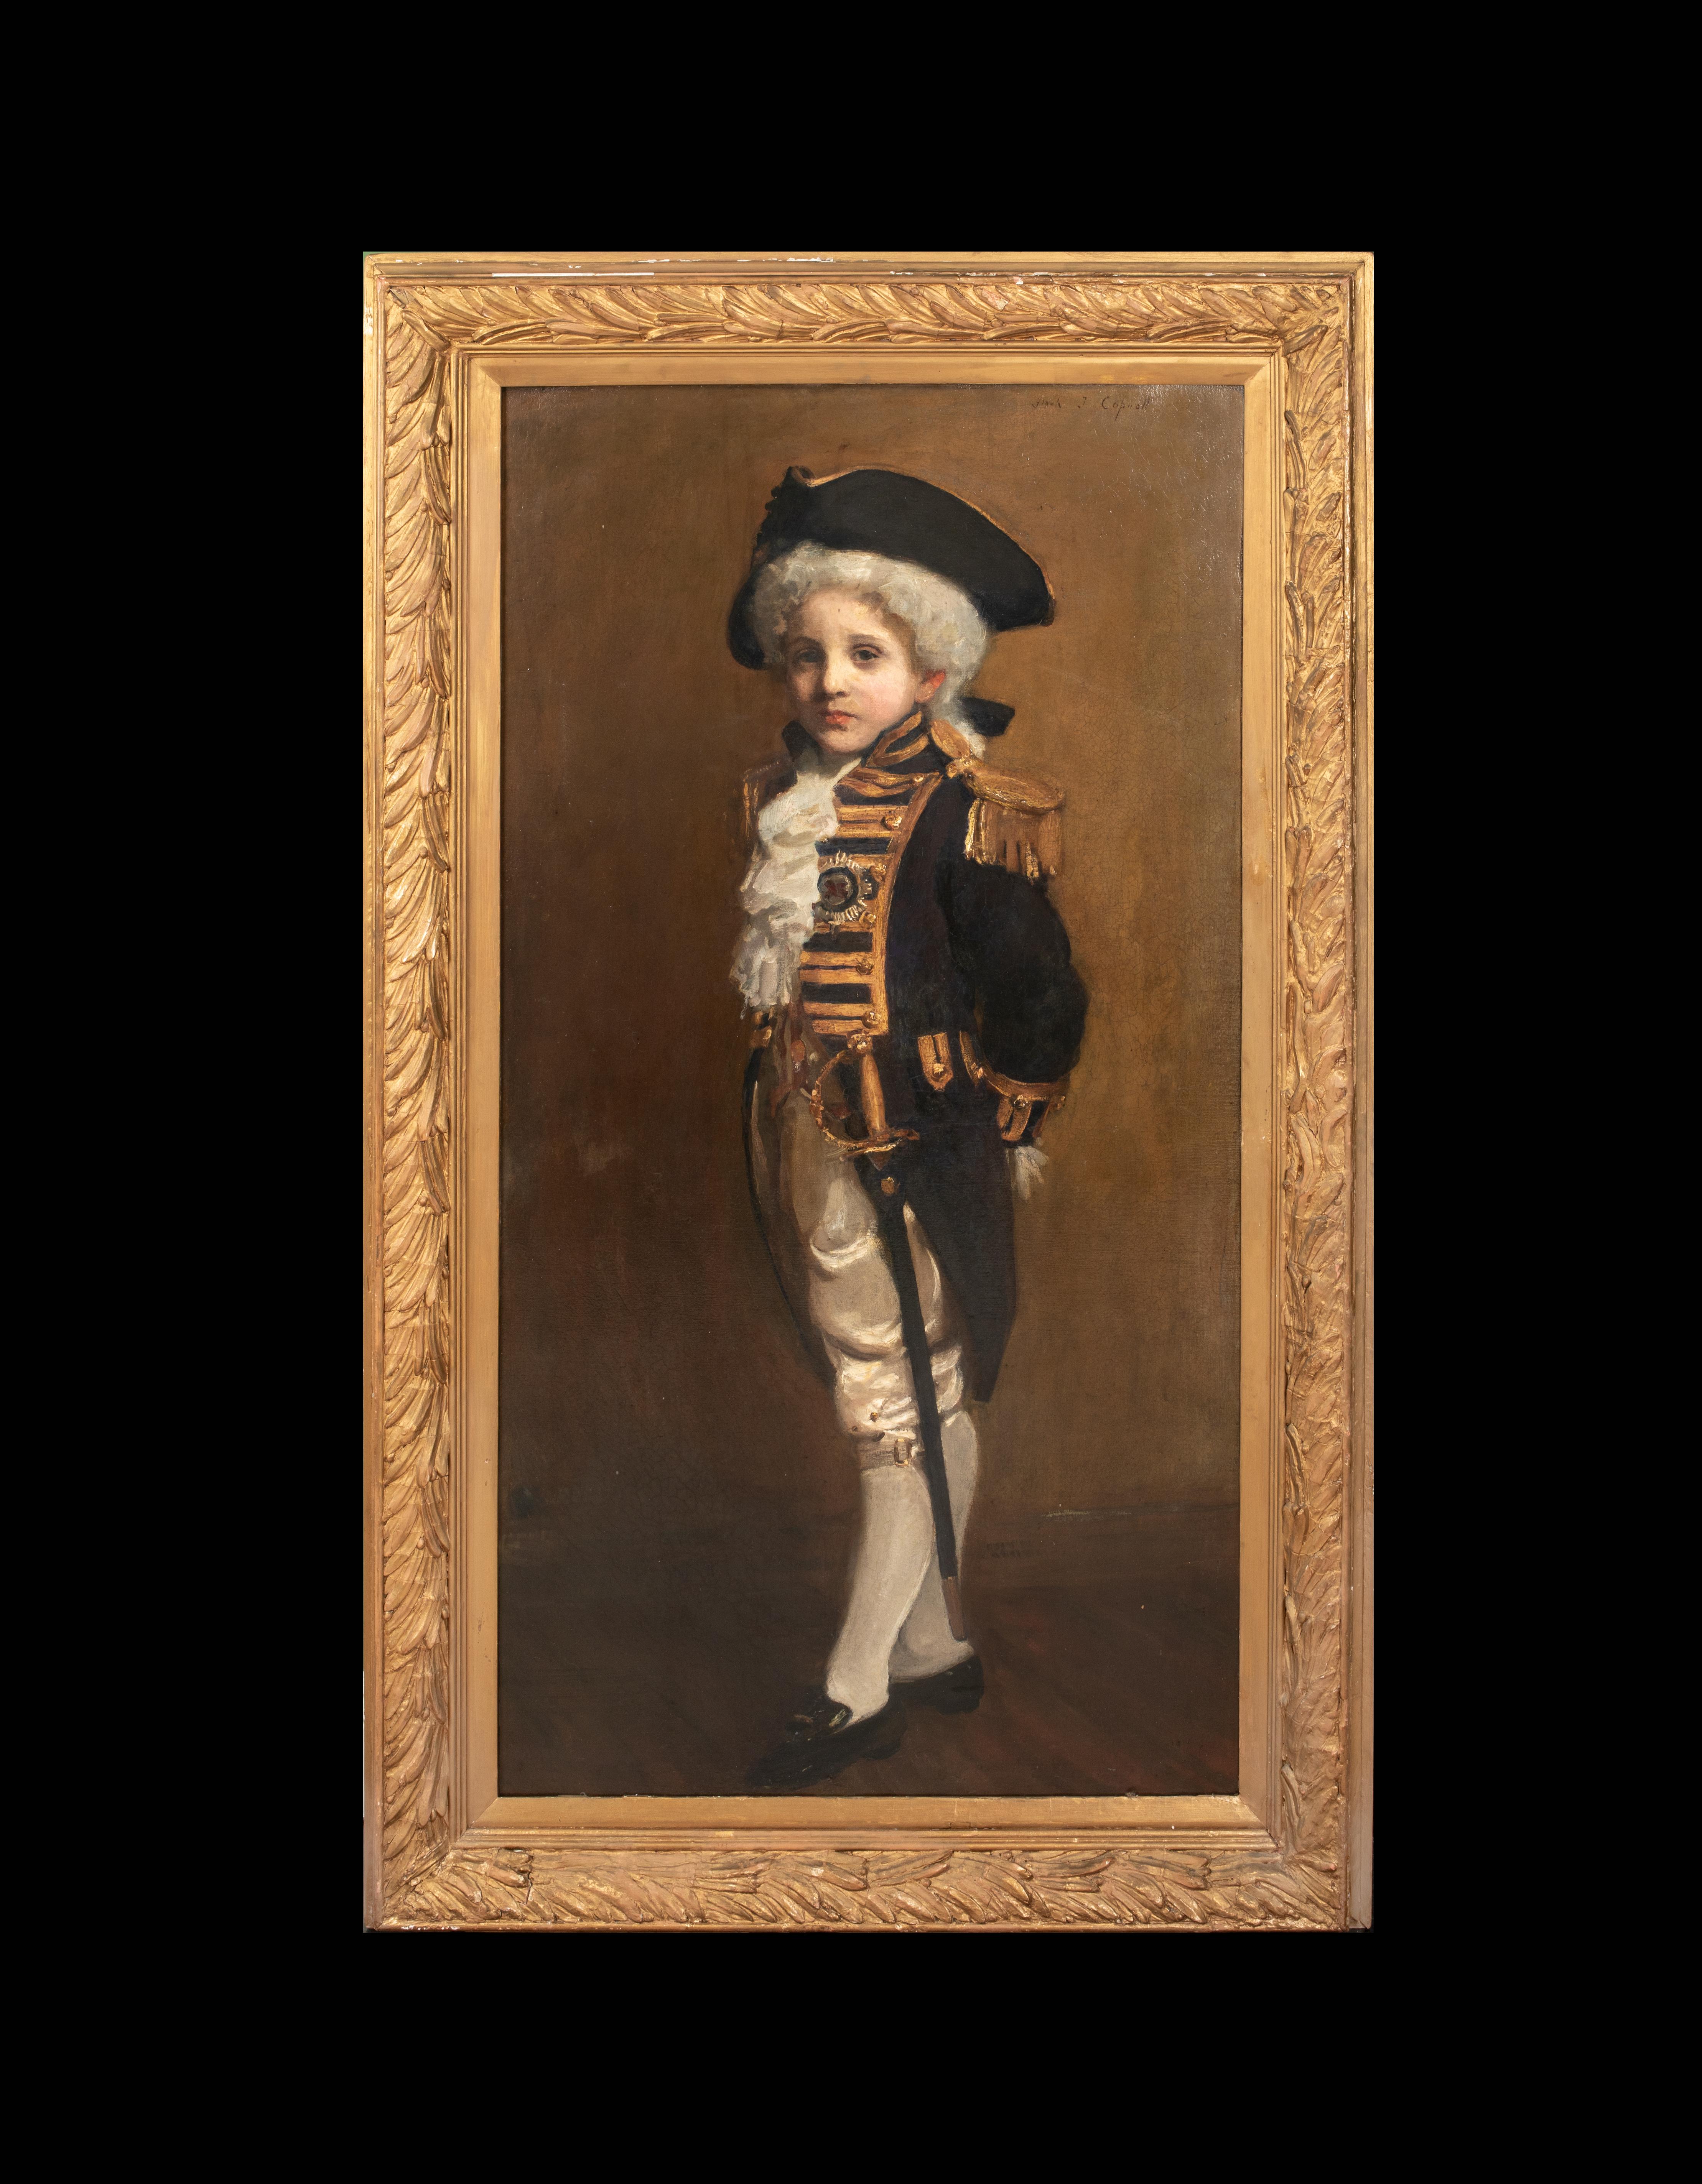  Portrait Of A Child As Lord Nelson, 19th Century   FRANK THOMAS COPNALL - Painting by Unknown